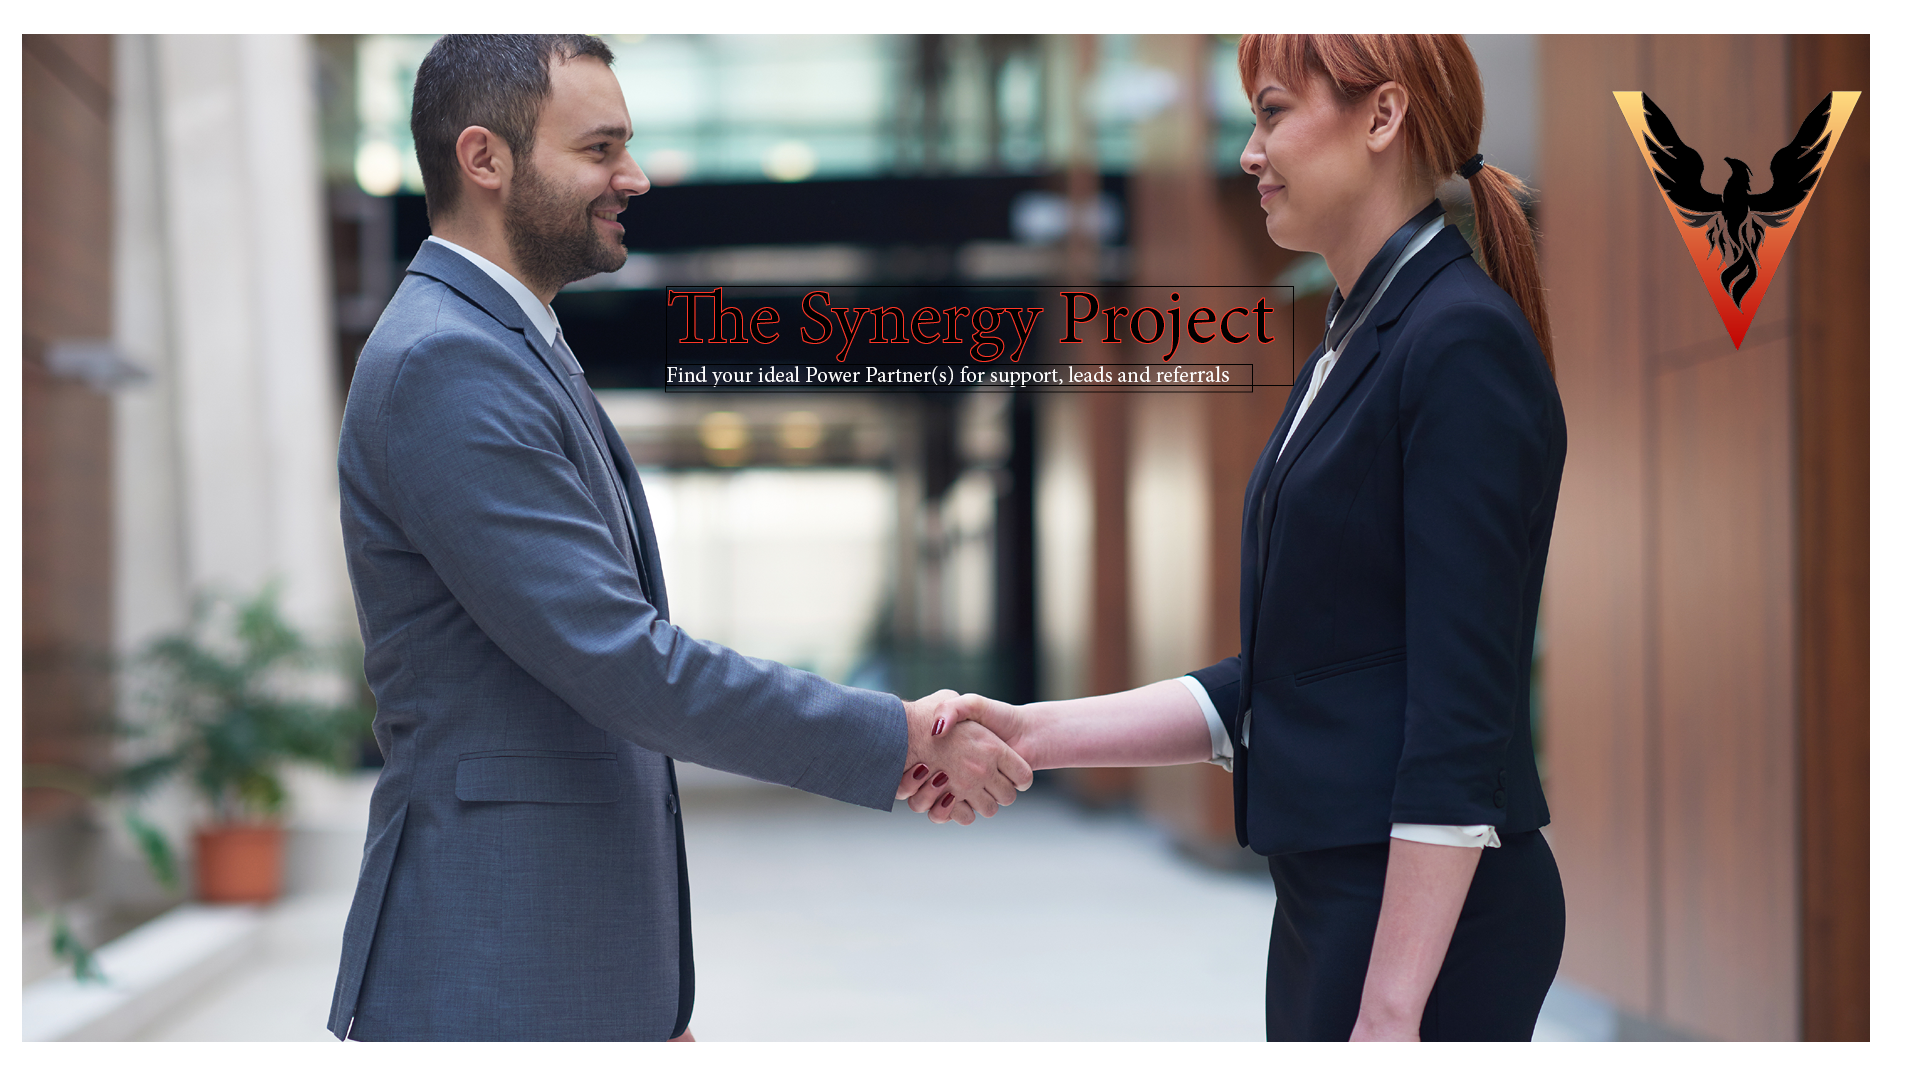 The Synergy Project Means More Referrals, More Leads, Less Hassle